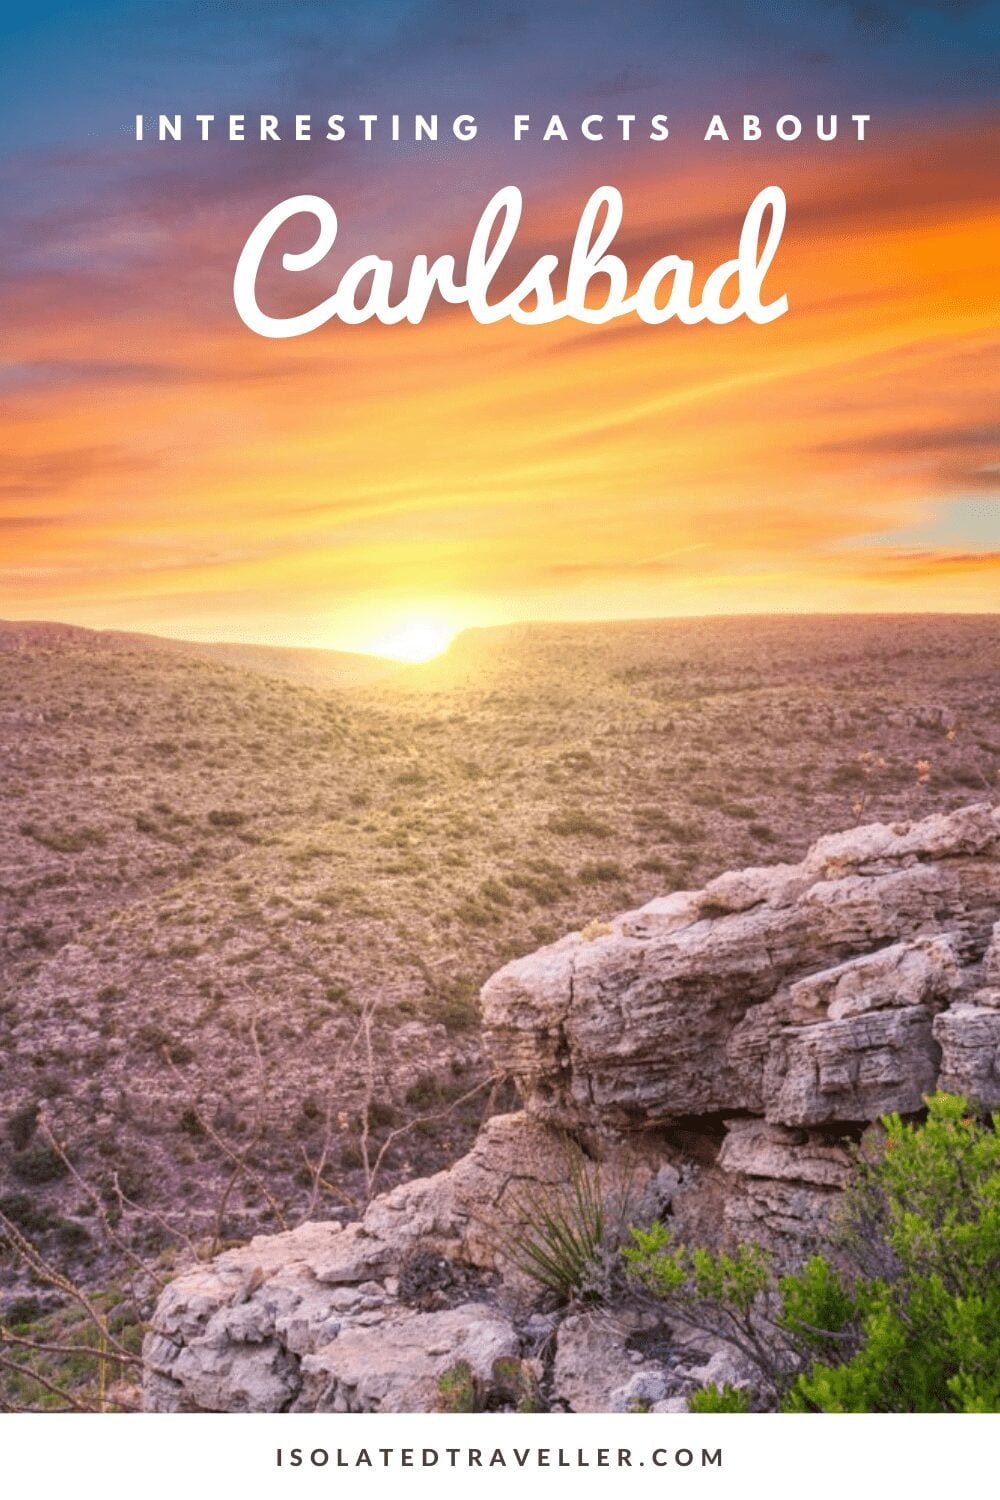 Facts About Carlsbad